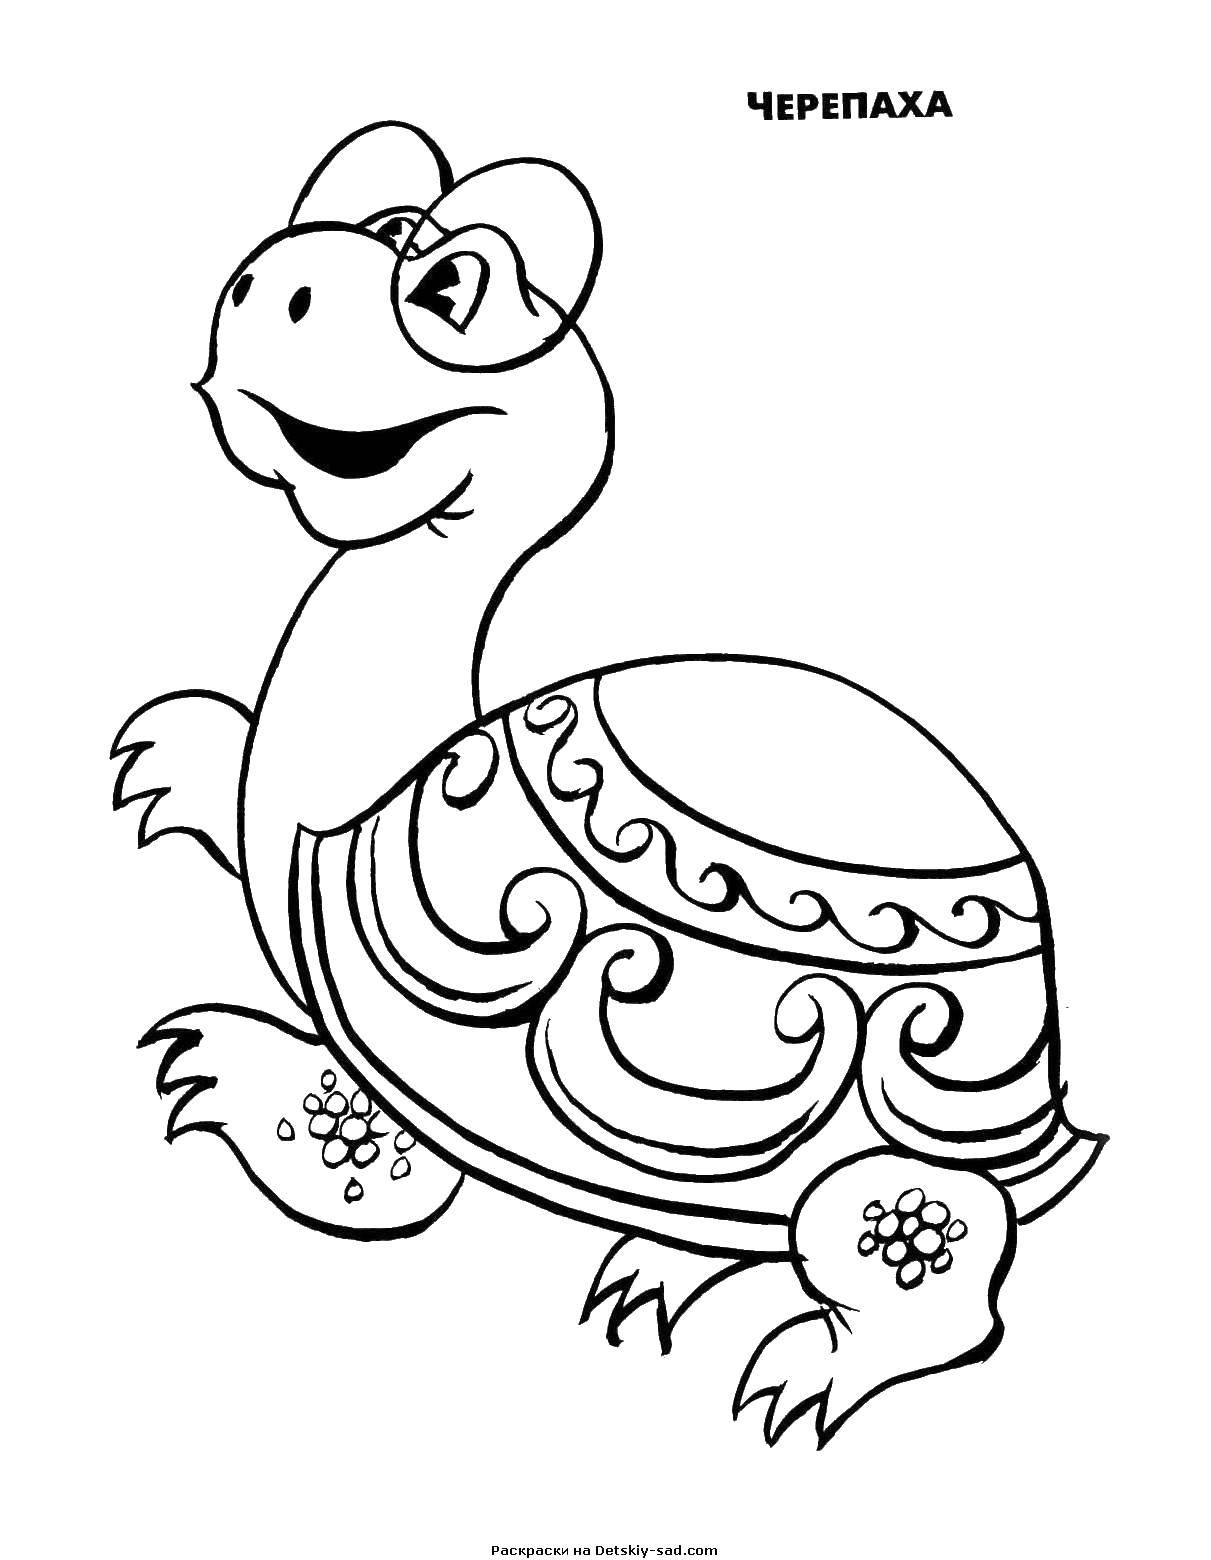 Coloring Turtle. Category cartoons. Tags:  turtle.